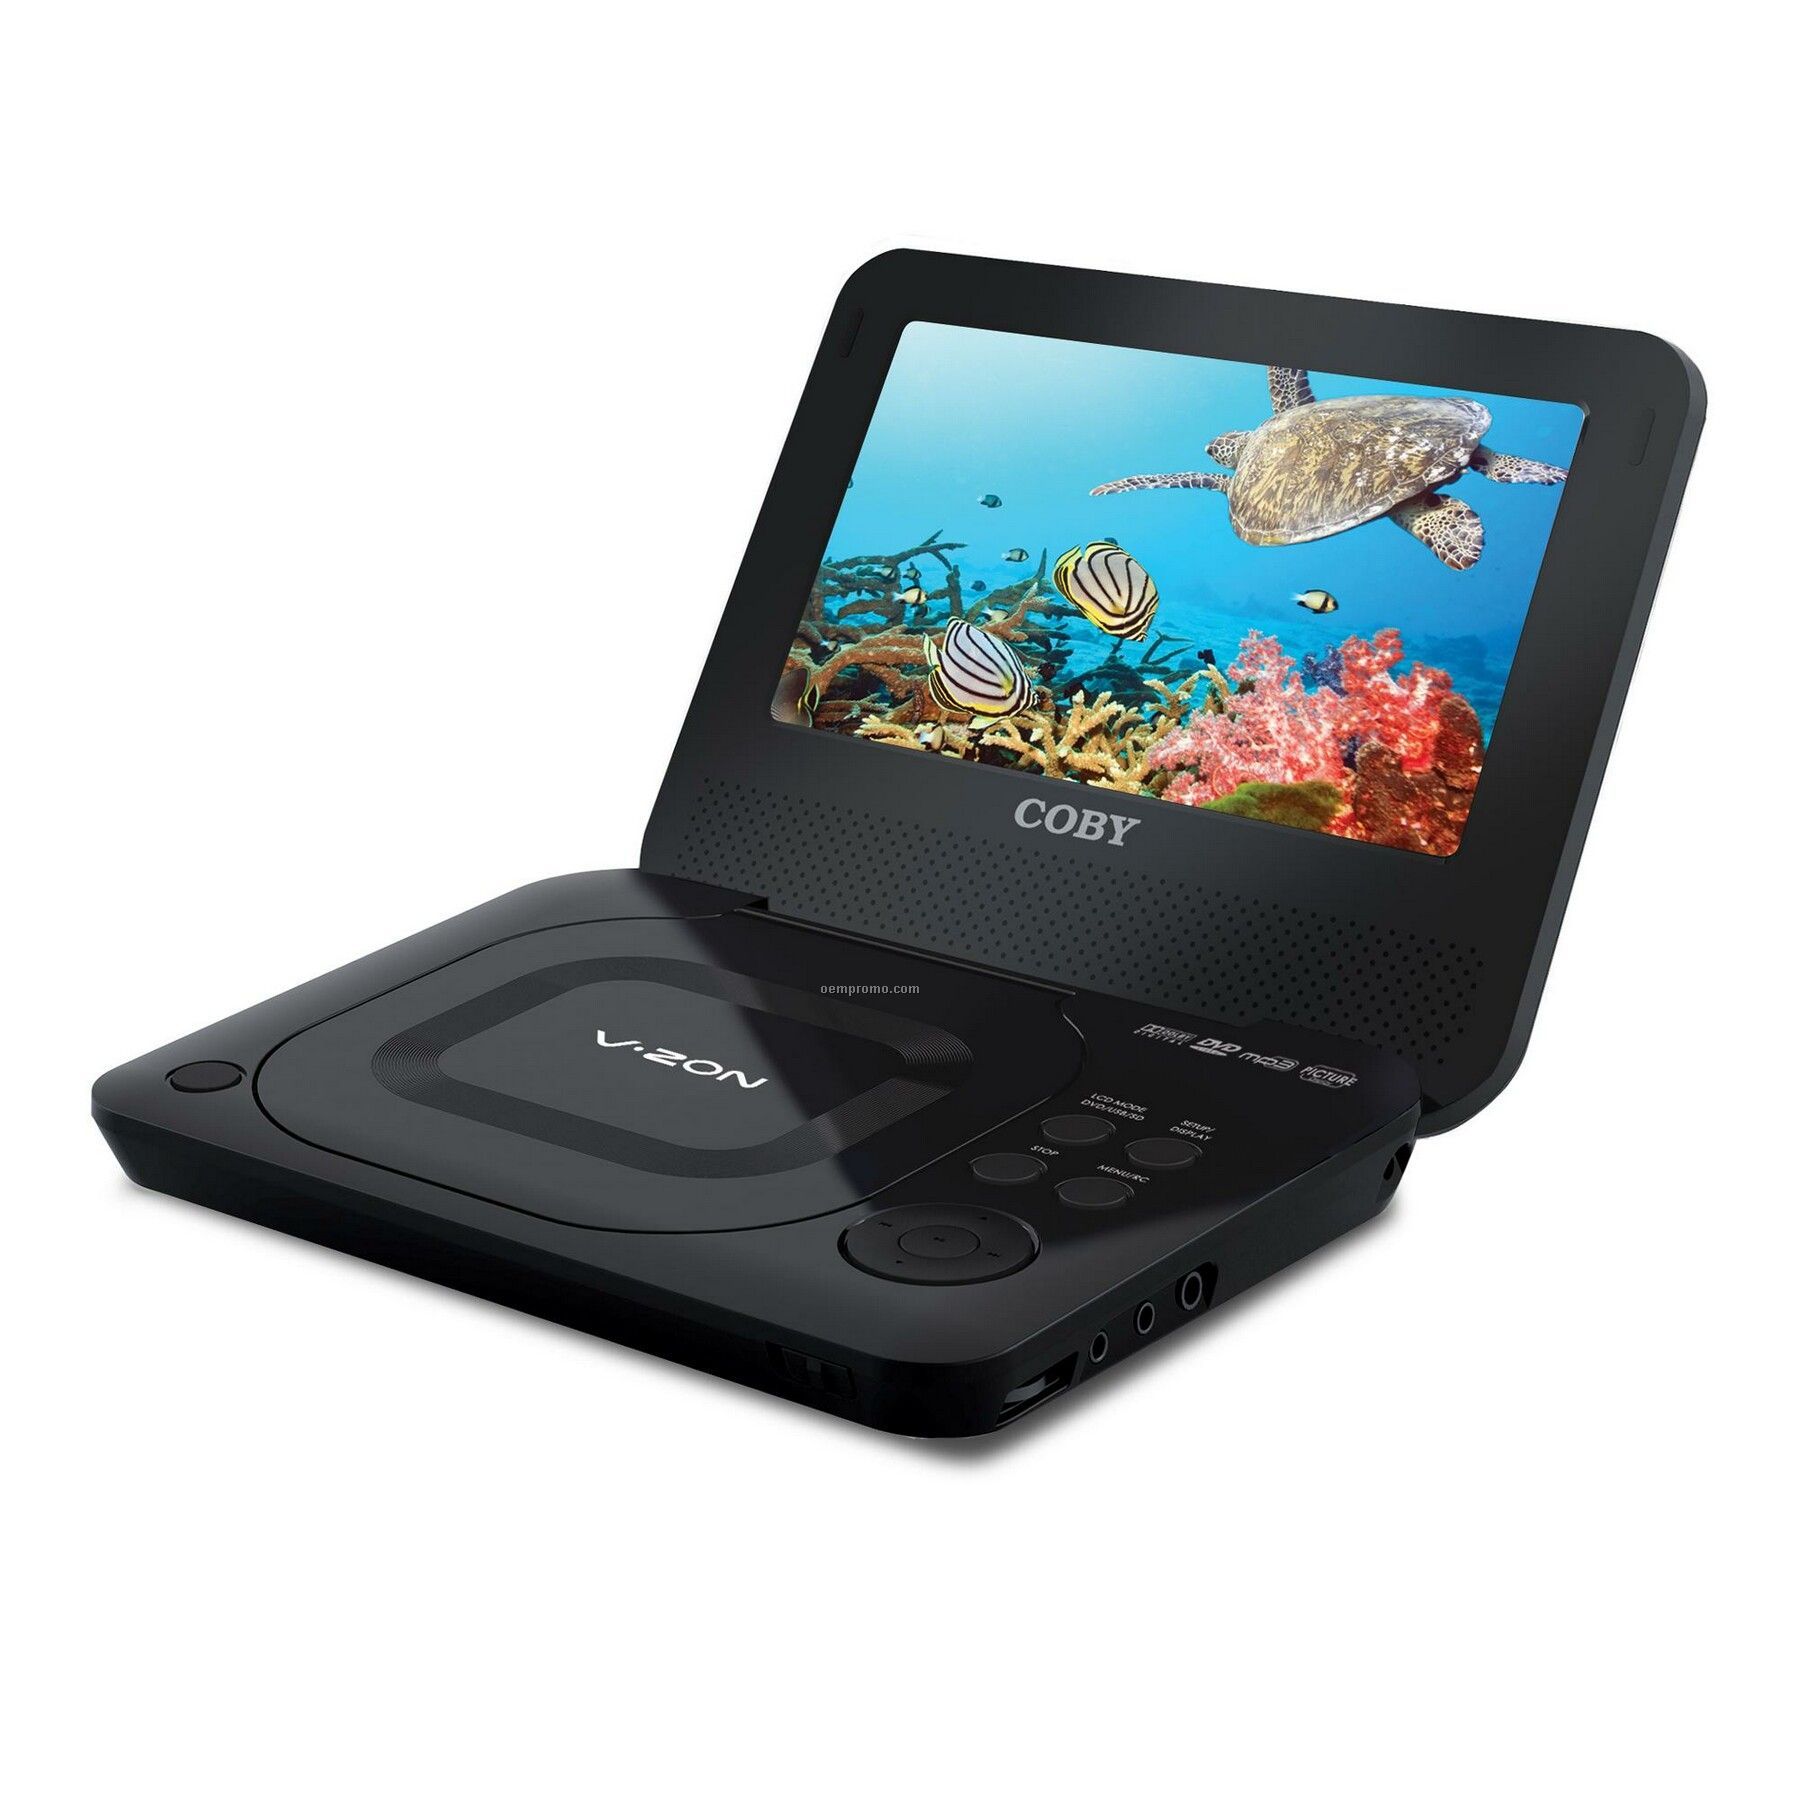 Coby 7" Portable DVD Player